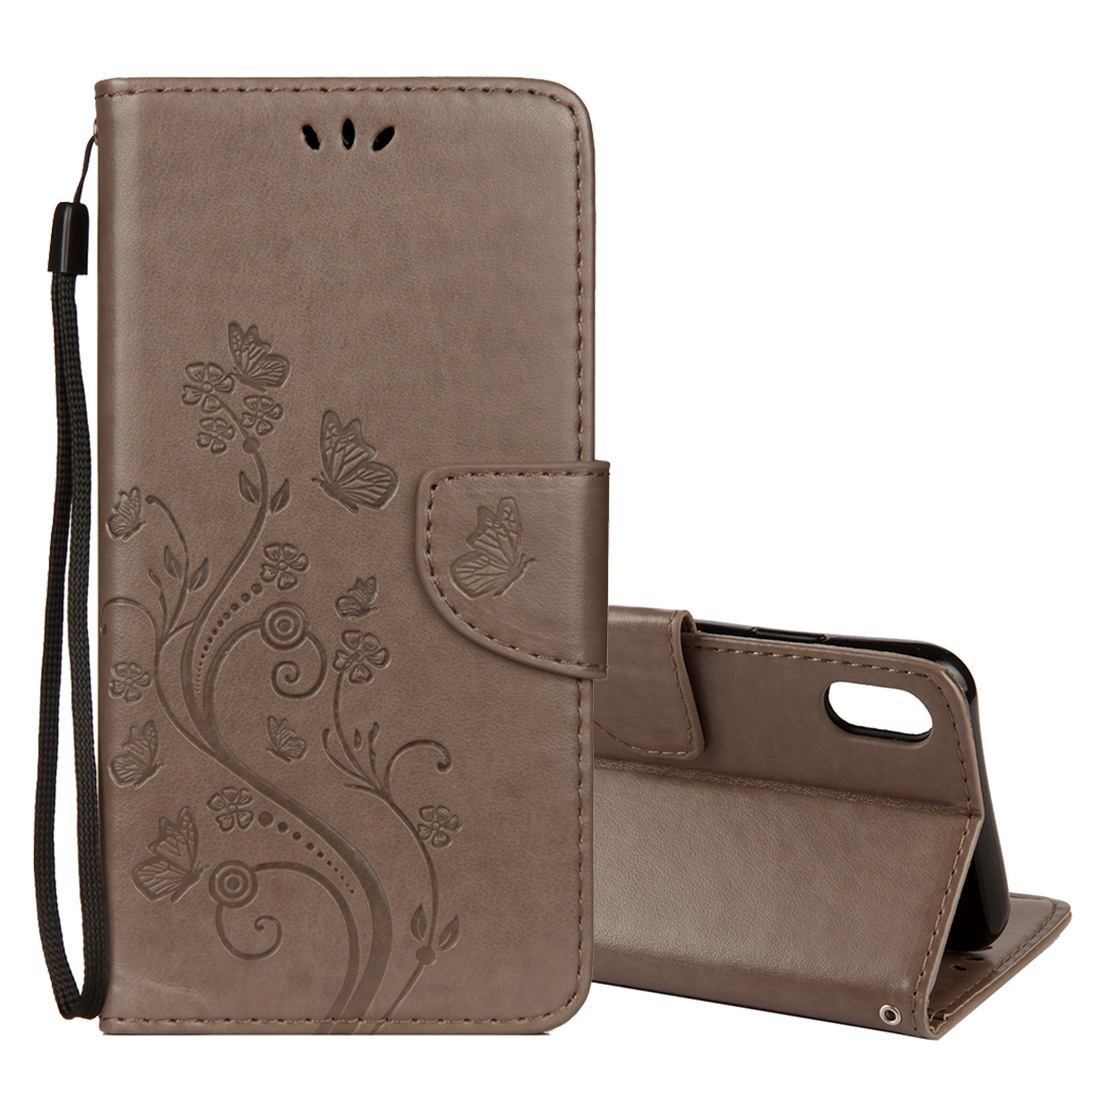 For iPhone XS MAX Case,Embossed Butterfly Flip Leather Wallet Stand Cover,Grey